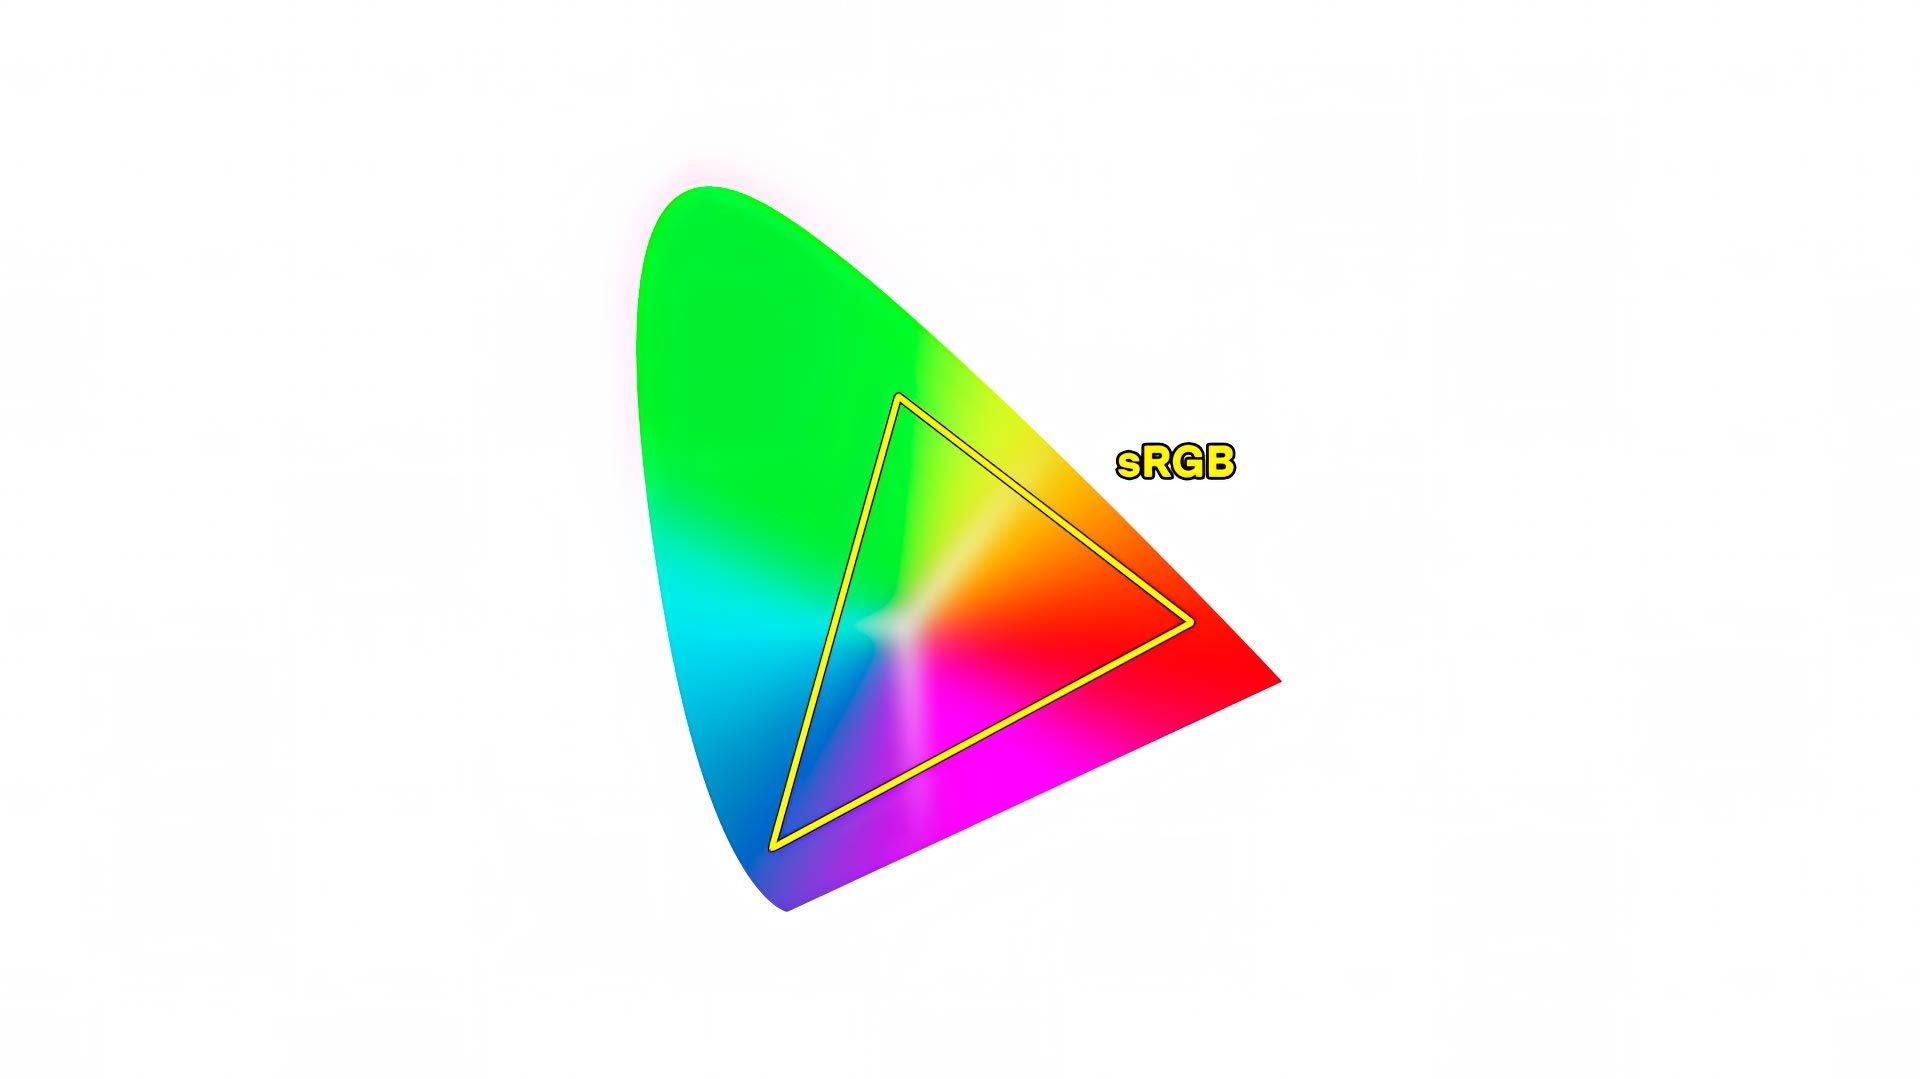 CIE chromaticity spectrum with sRGB color gamut